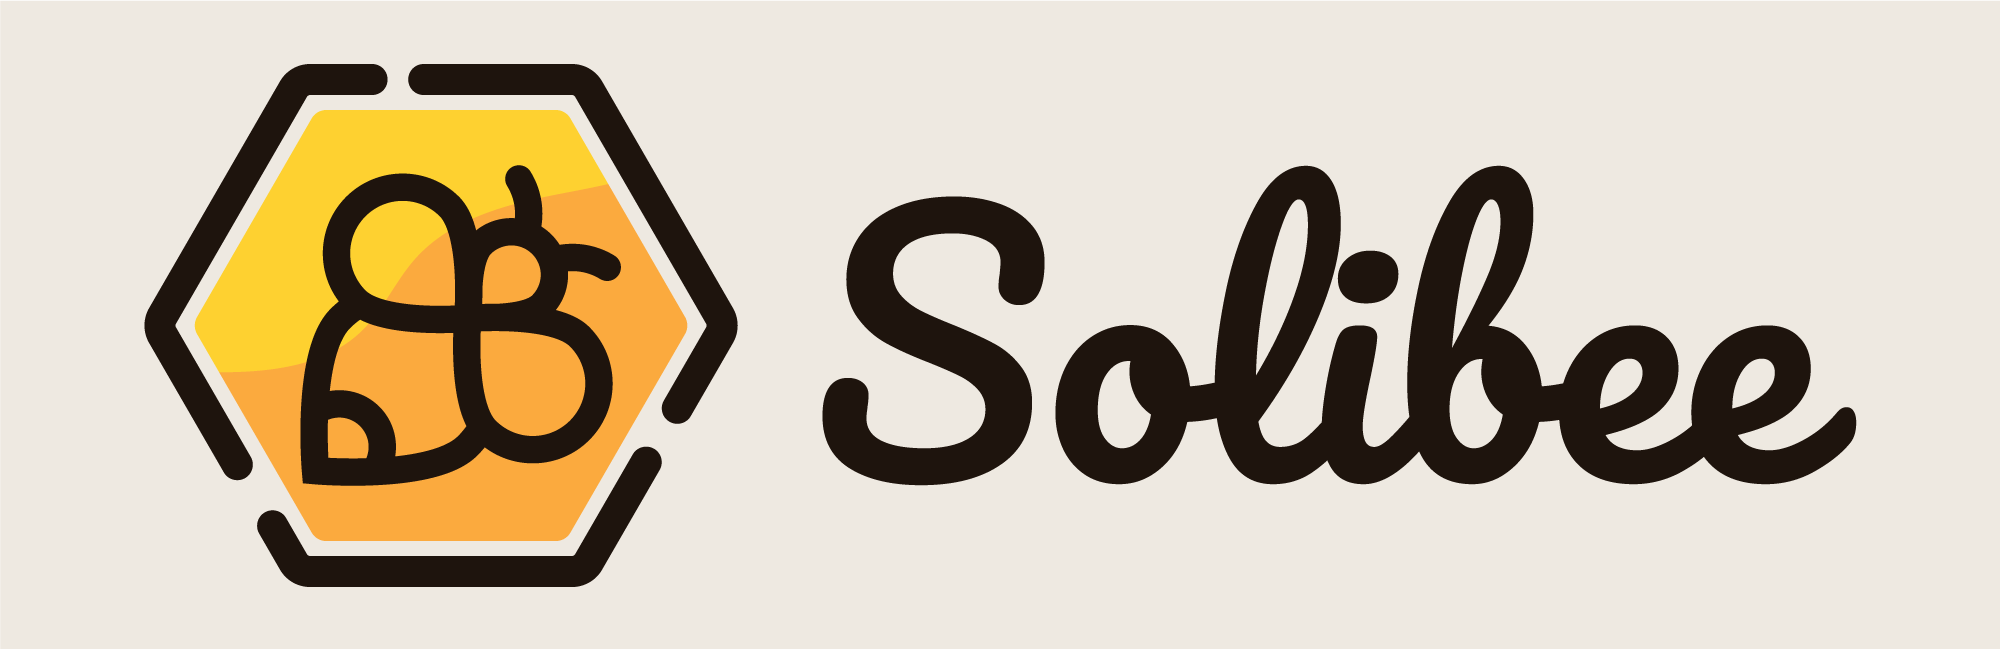 solibee-logo-and-name-v2.png